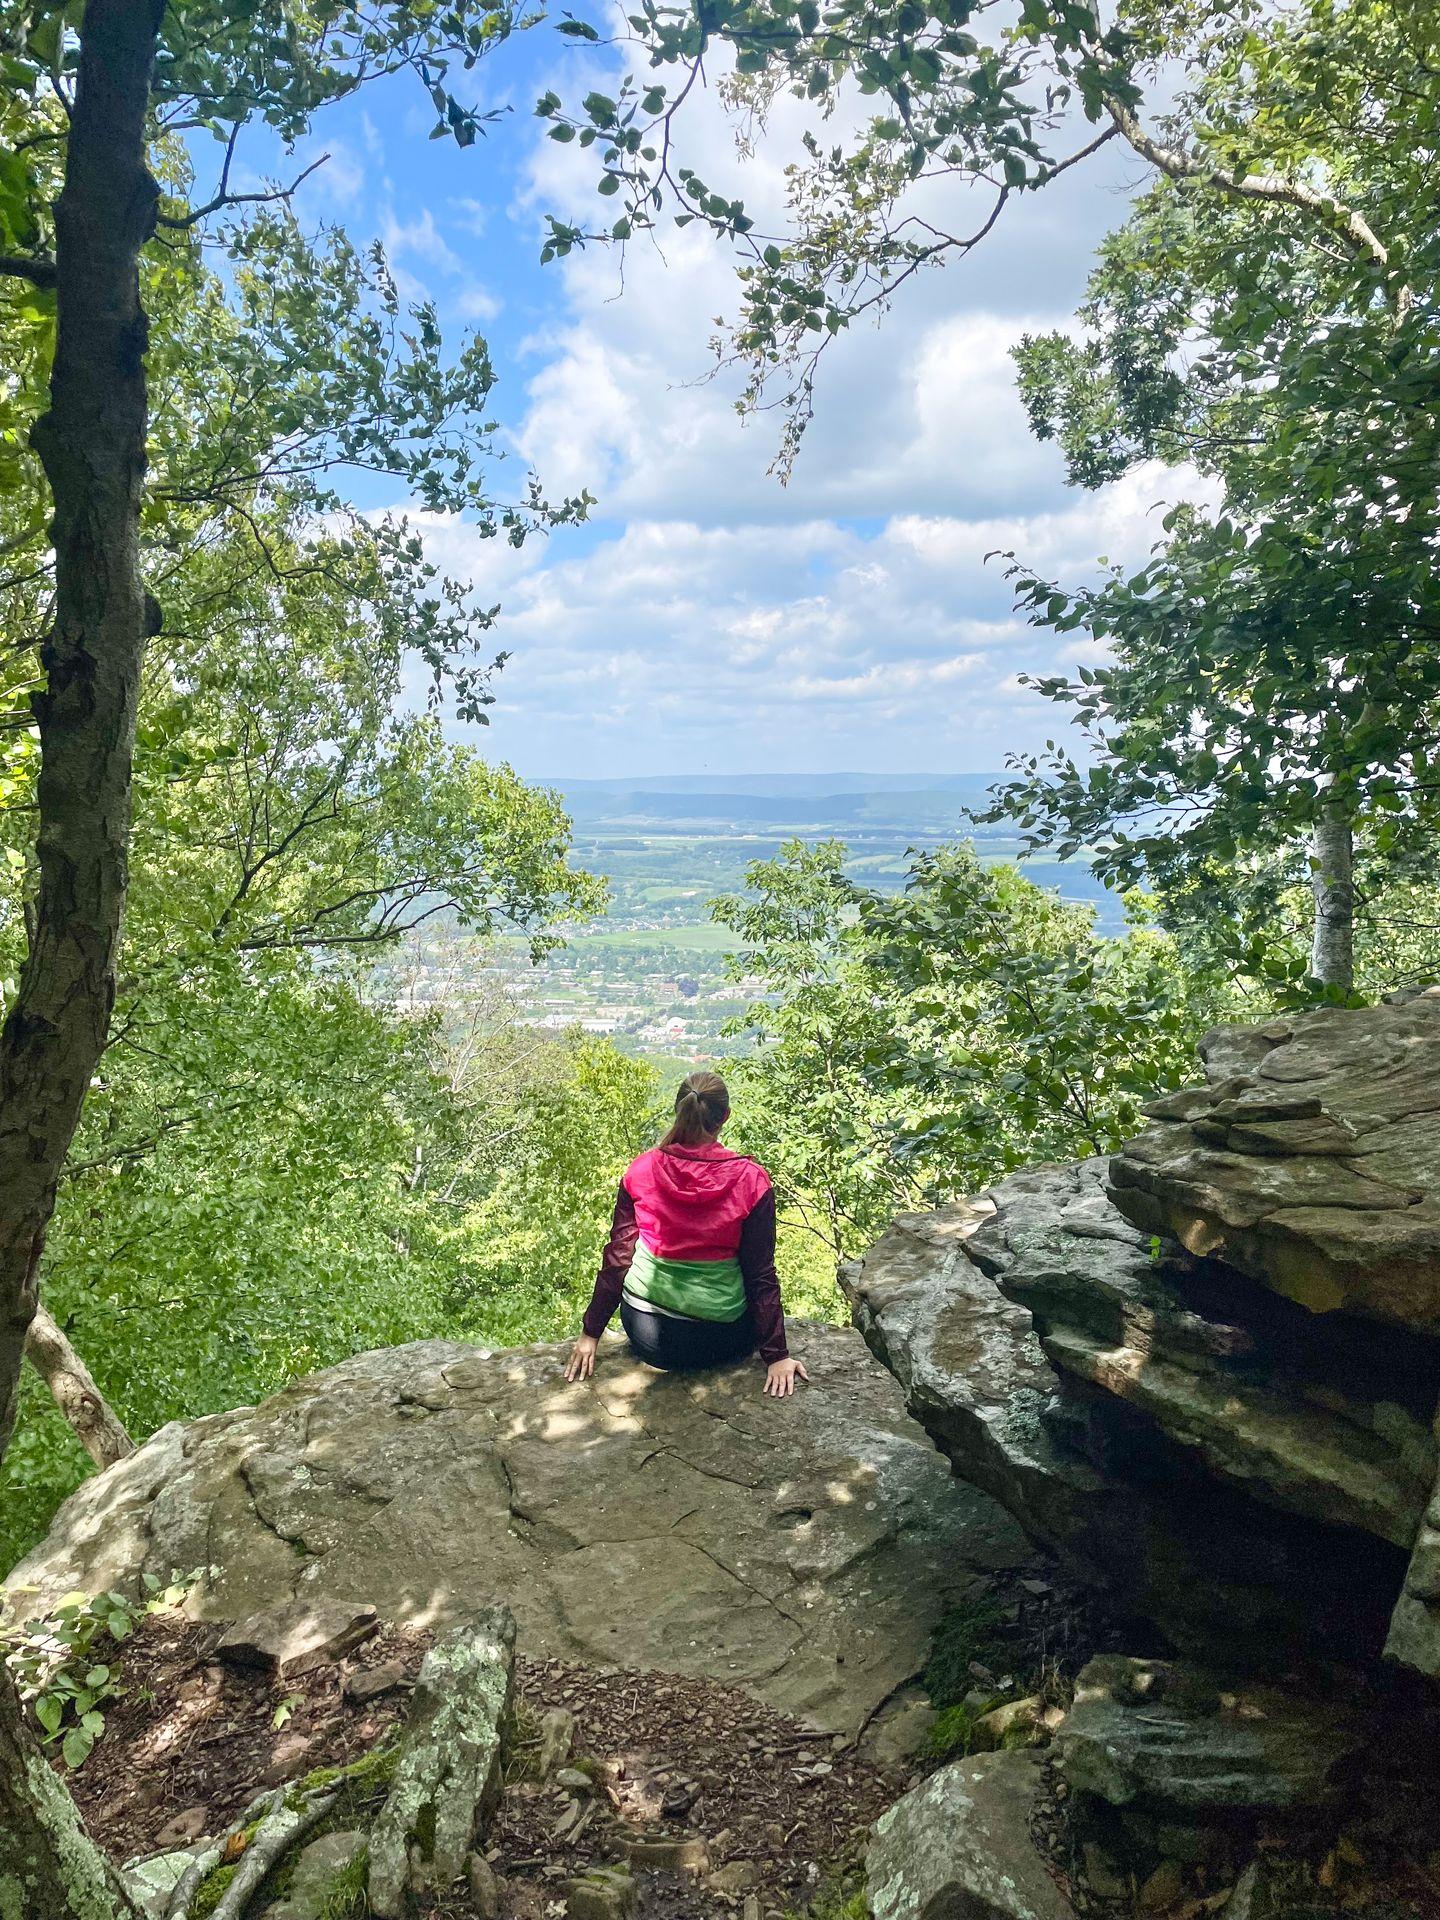 Lydia sitting on a rock and looking out at the view at the Nittany Mall Overlook on the Mount Nittany Loop trail.